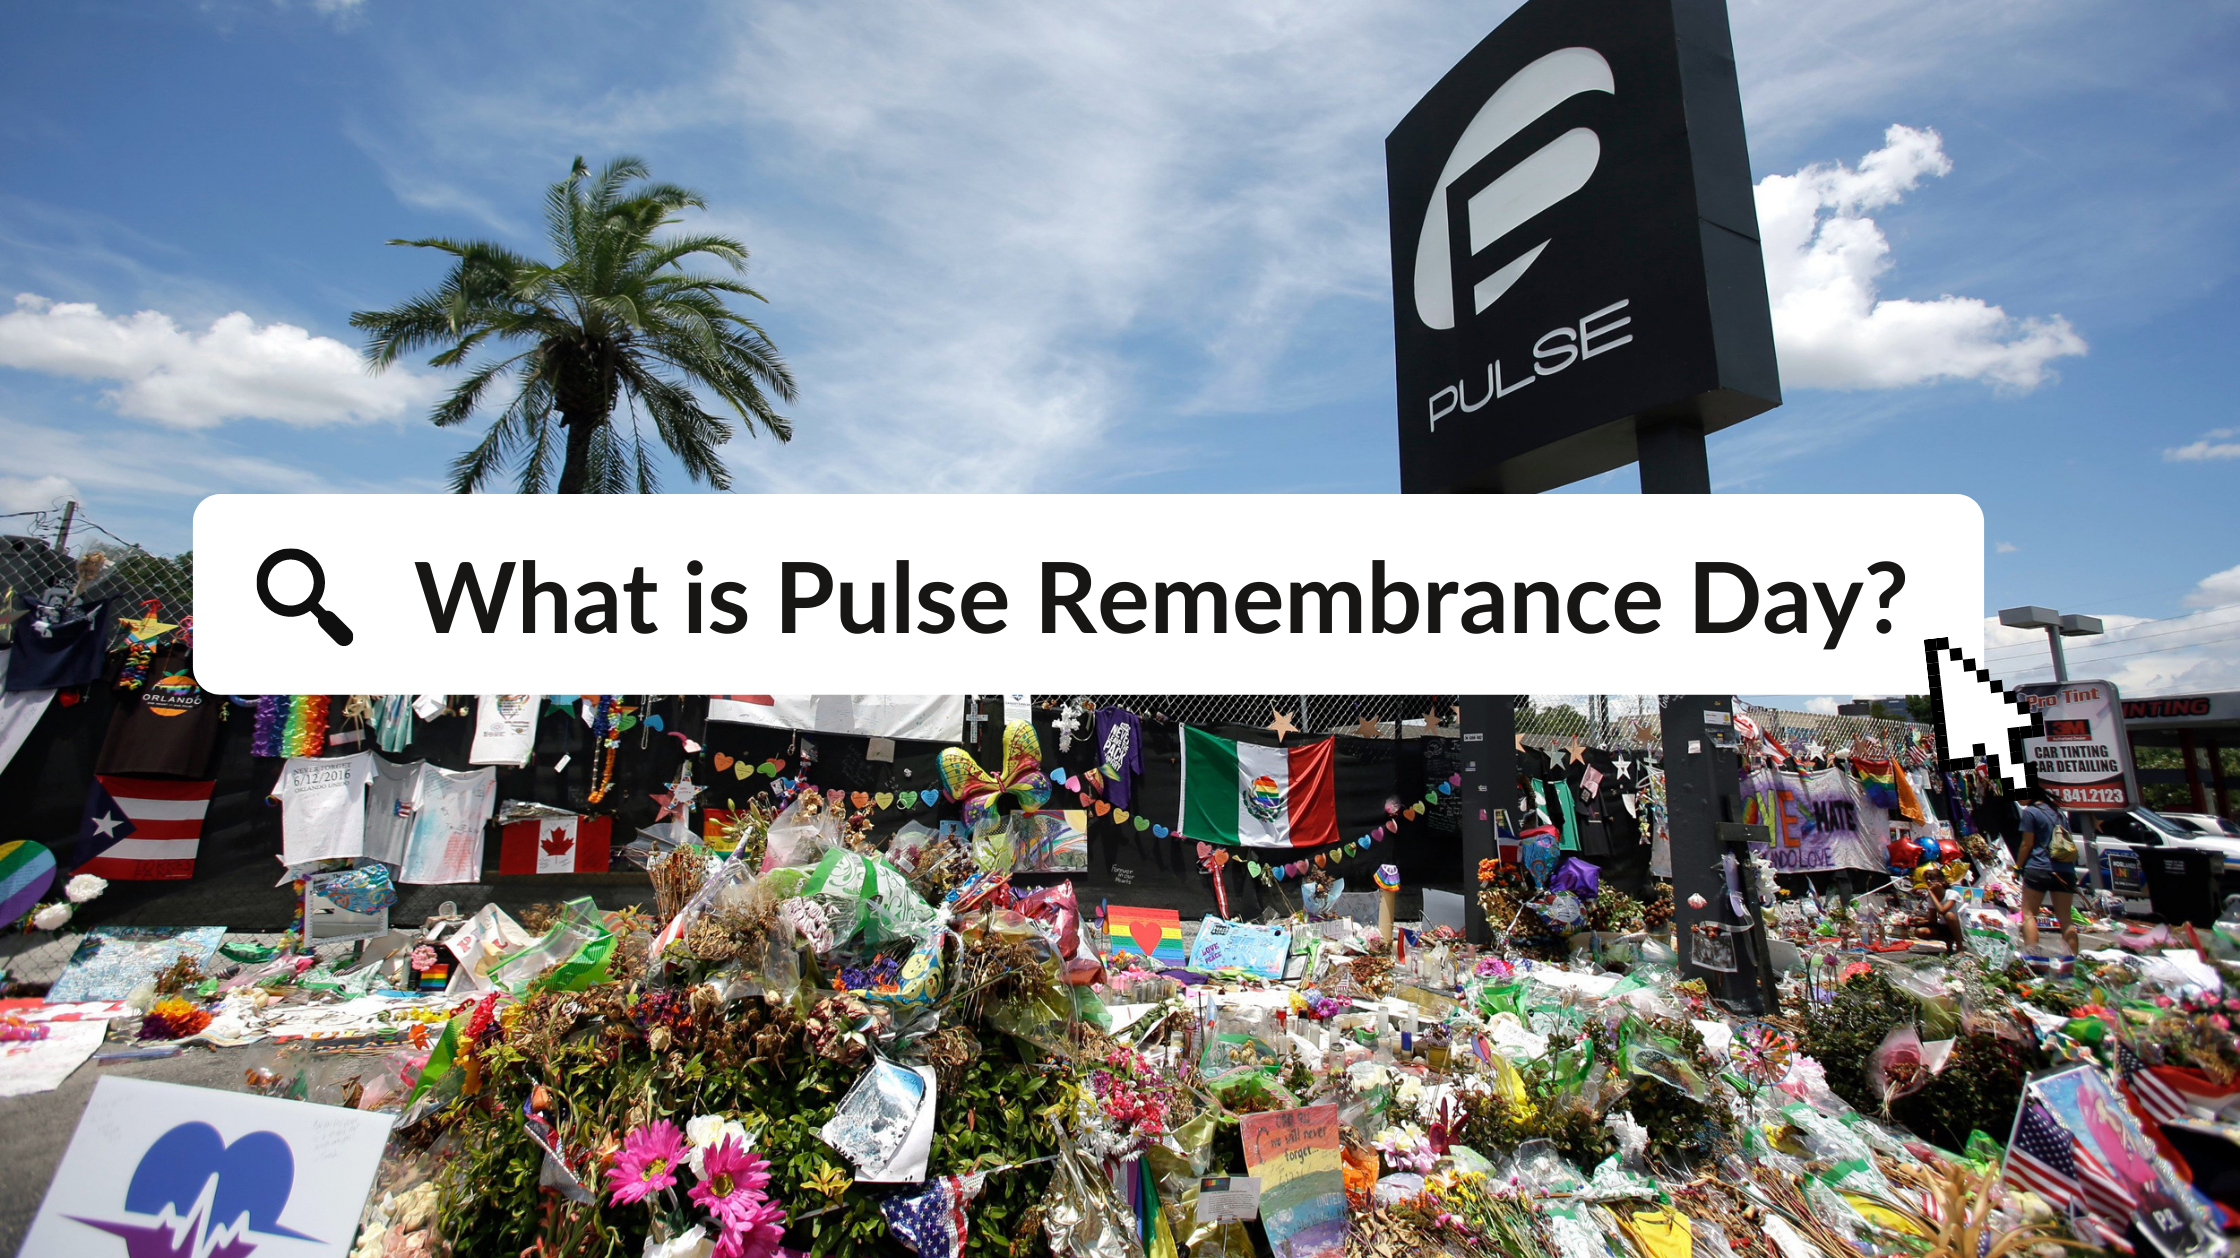 Pulse Remembrance Day